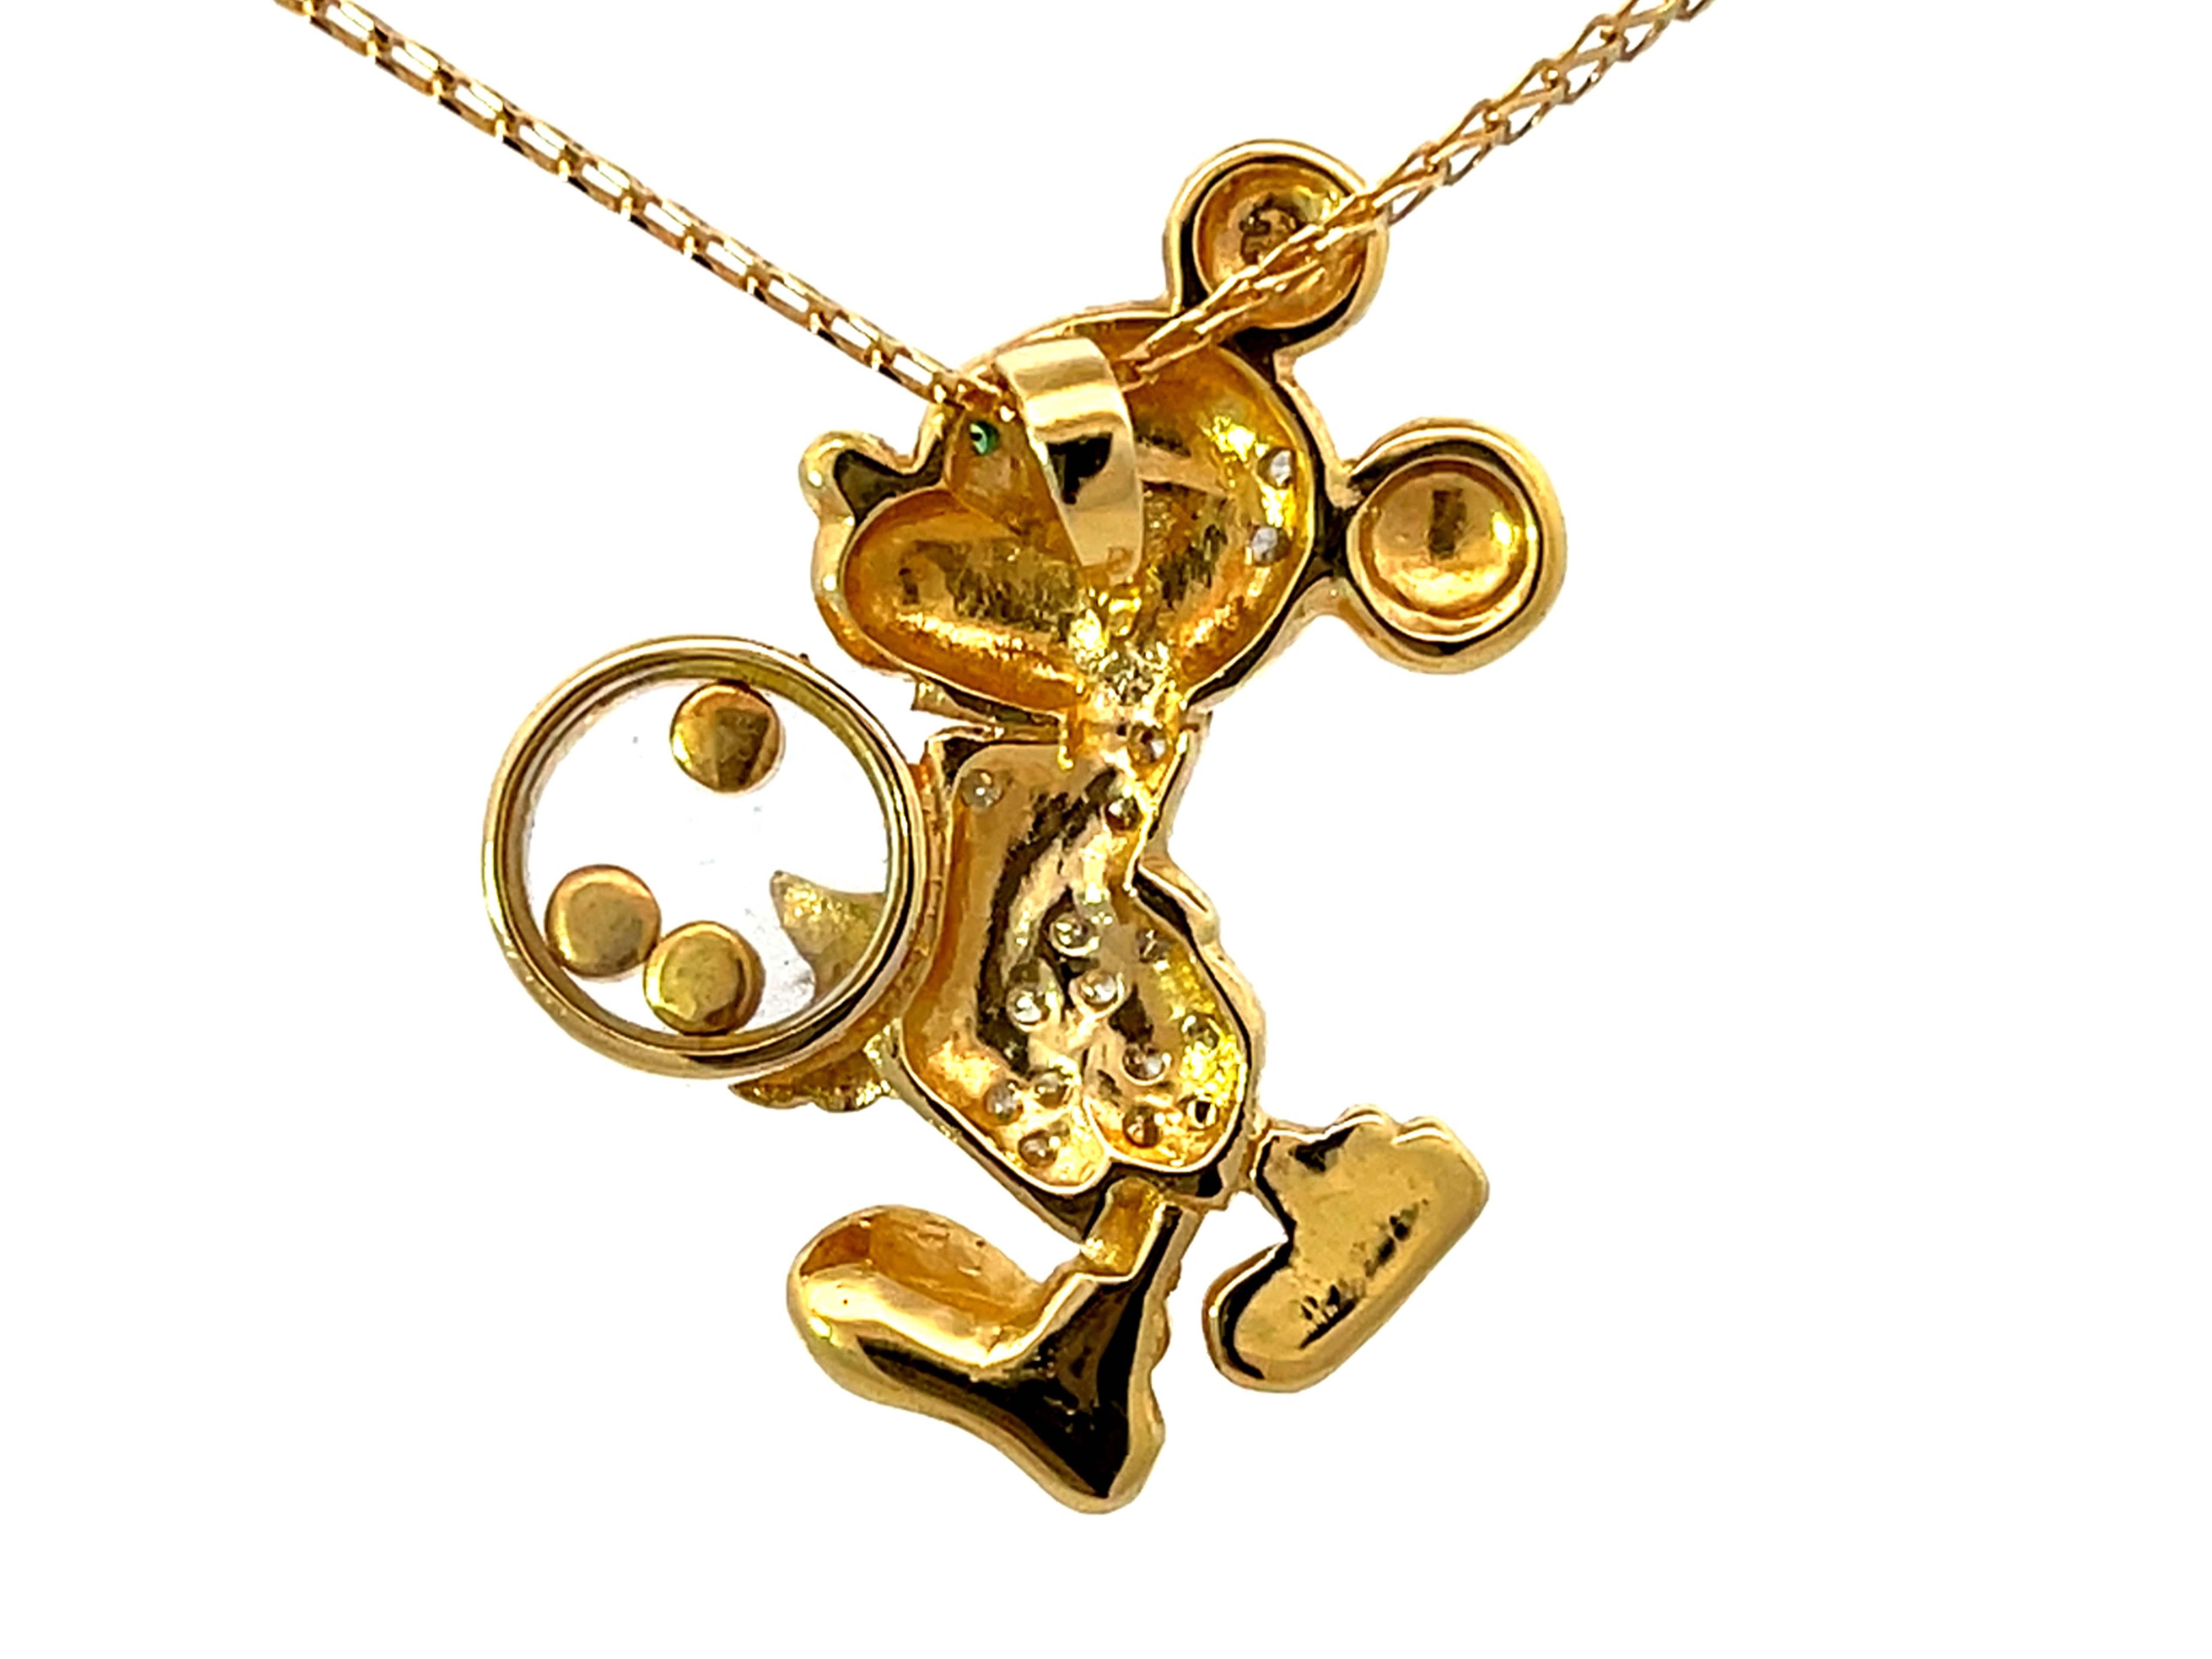 Brilliant Cut Diamond Emerald Sapphire Mickey Mouse Pendant Necklace Solid 18k Yellow Gold For Sale